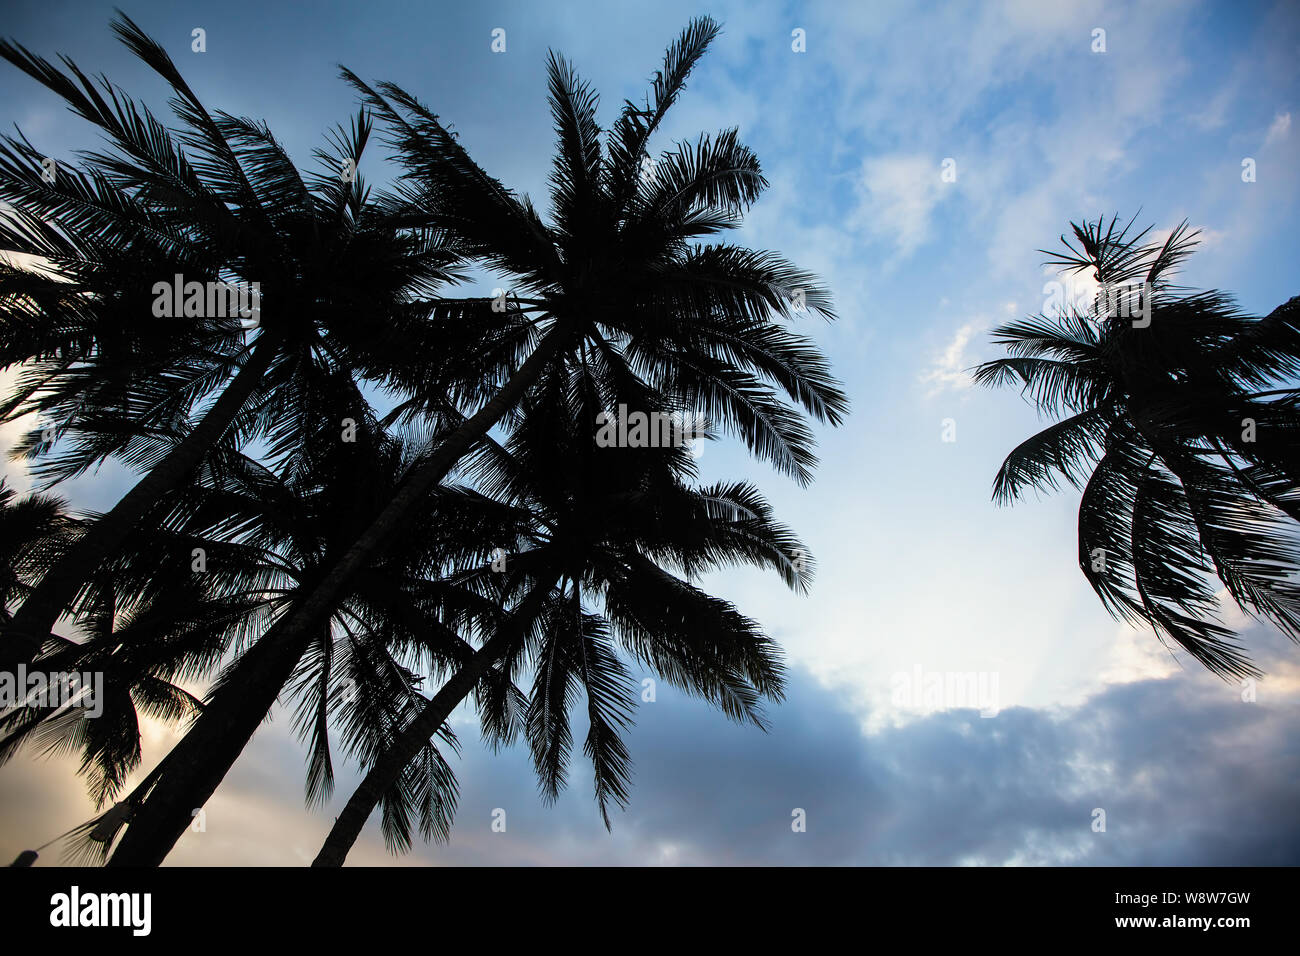 Silhouette of tropical palm trees against a blue sky. Stock Photo